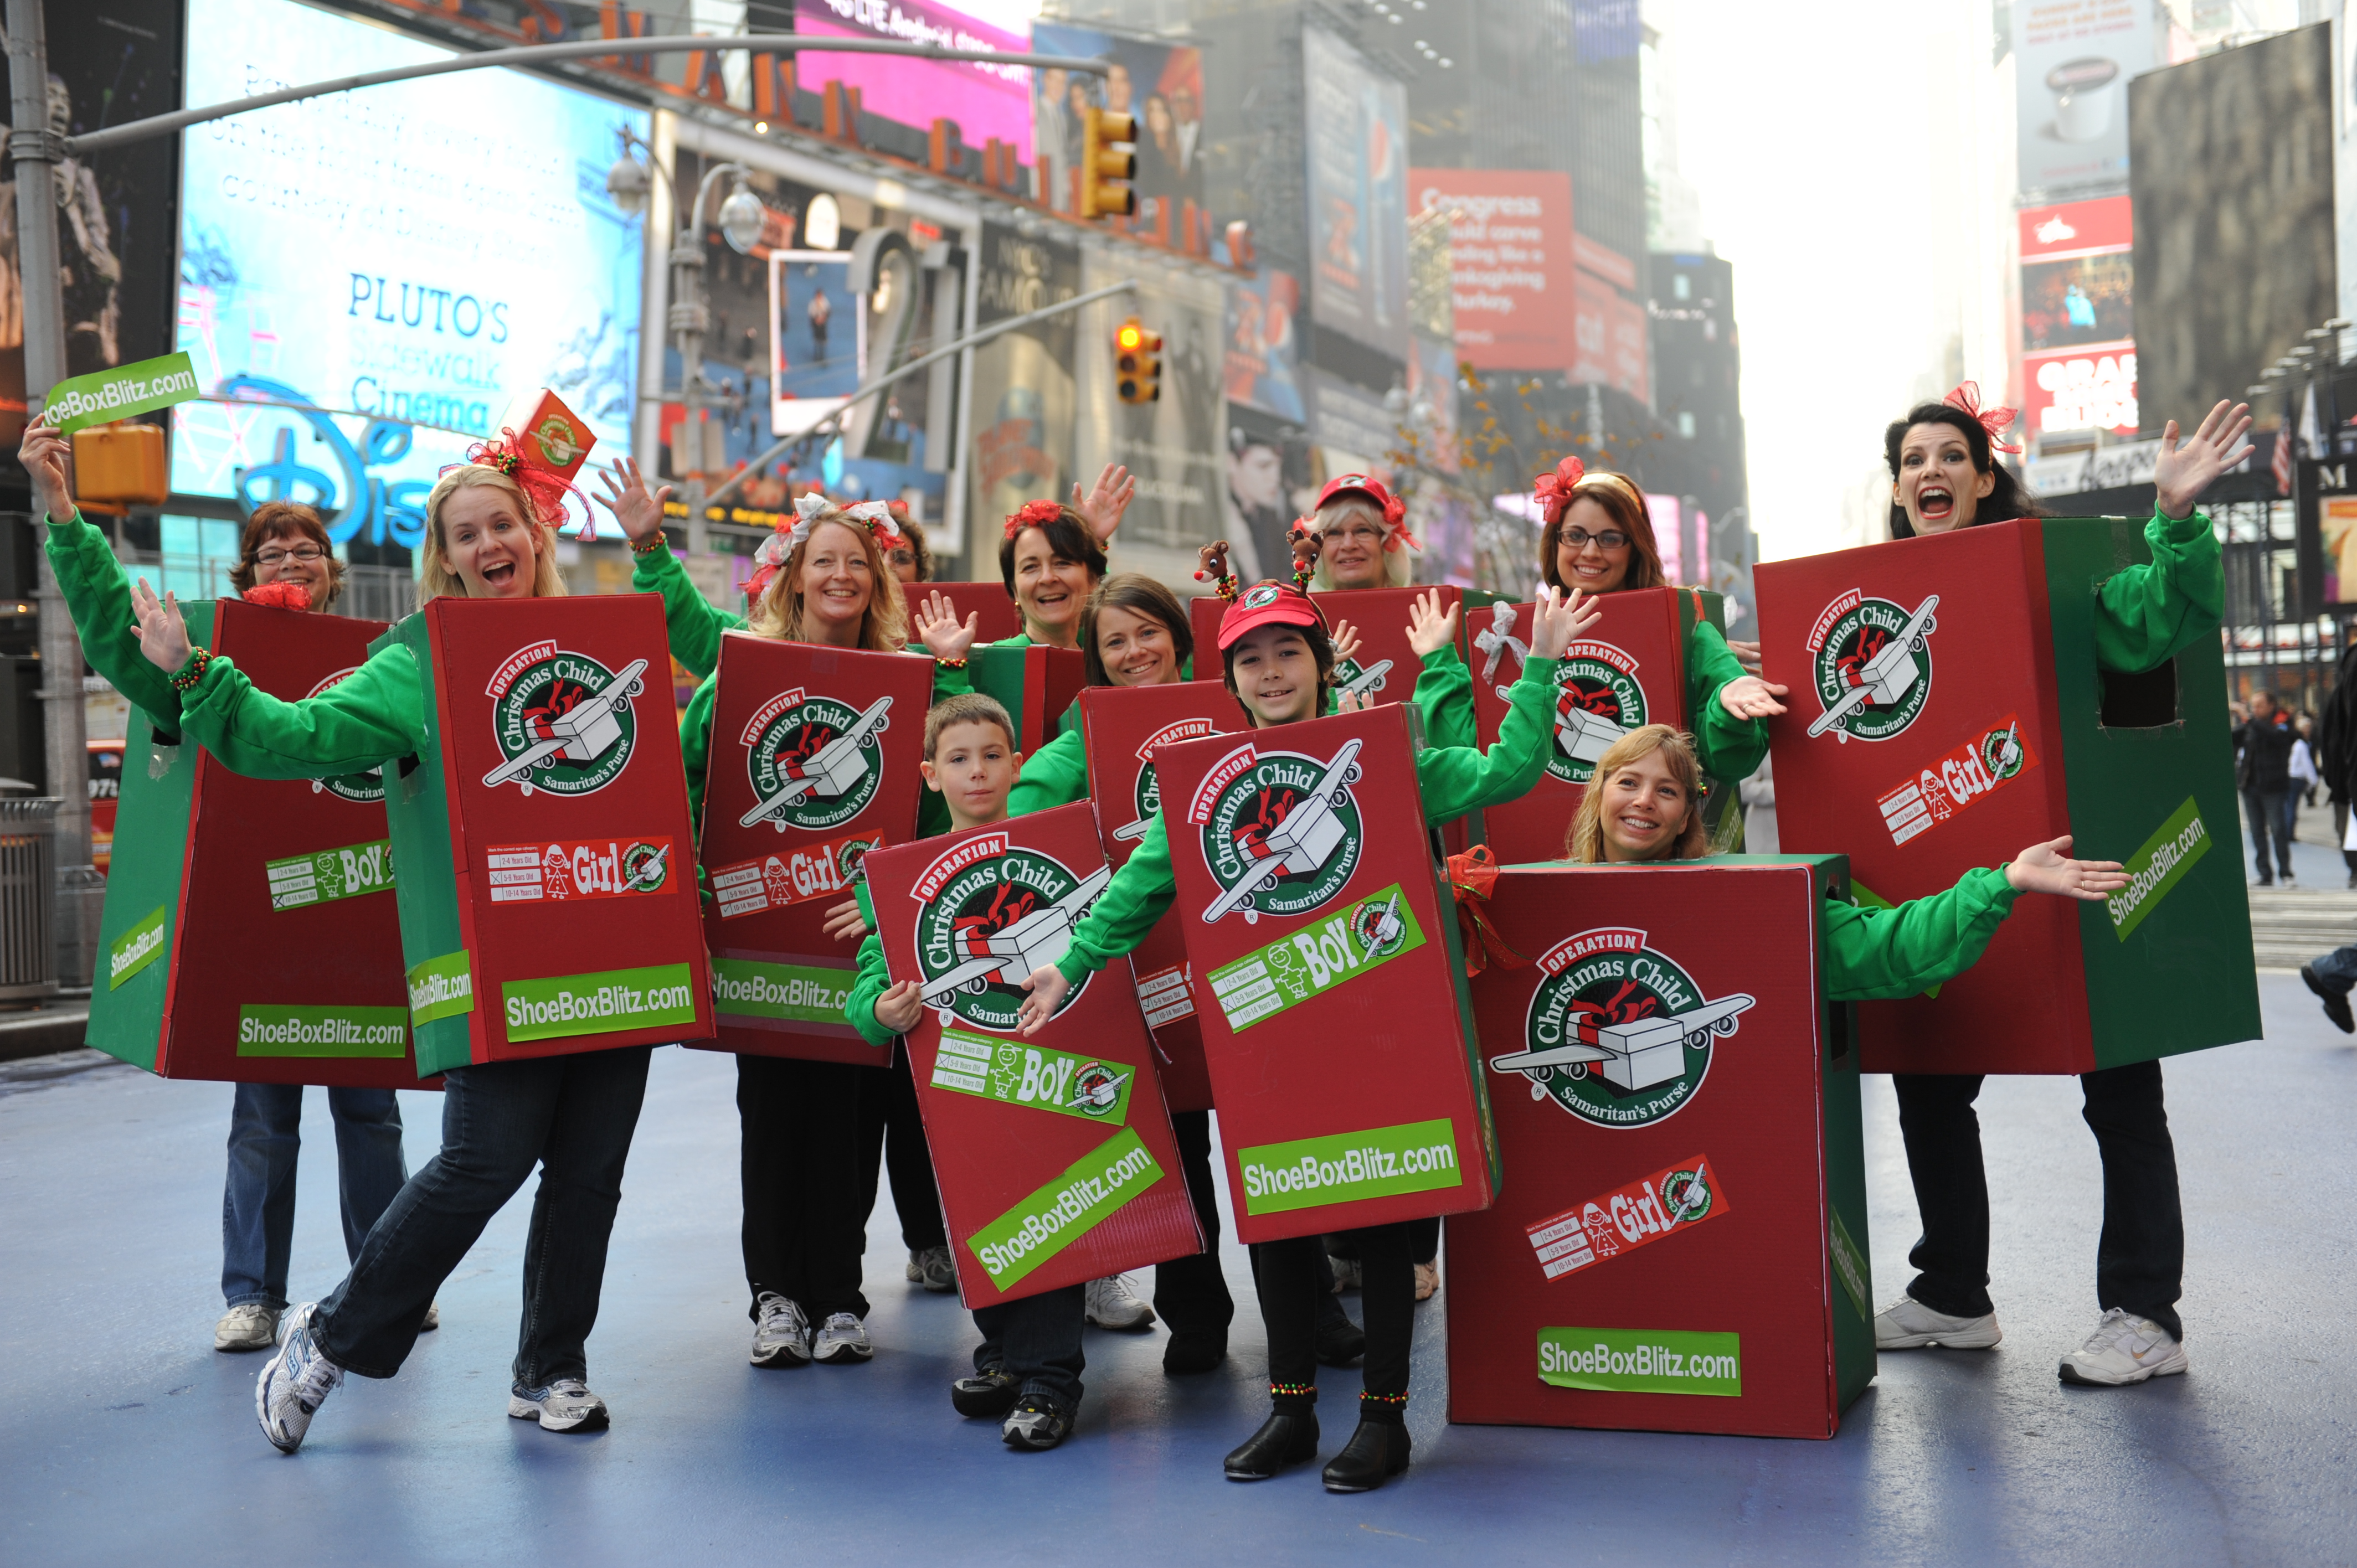 We Tap for Orphans around the globe in the Times Square Media Blitz for OCC